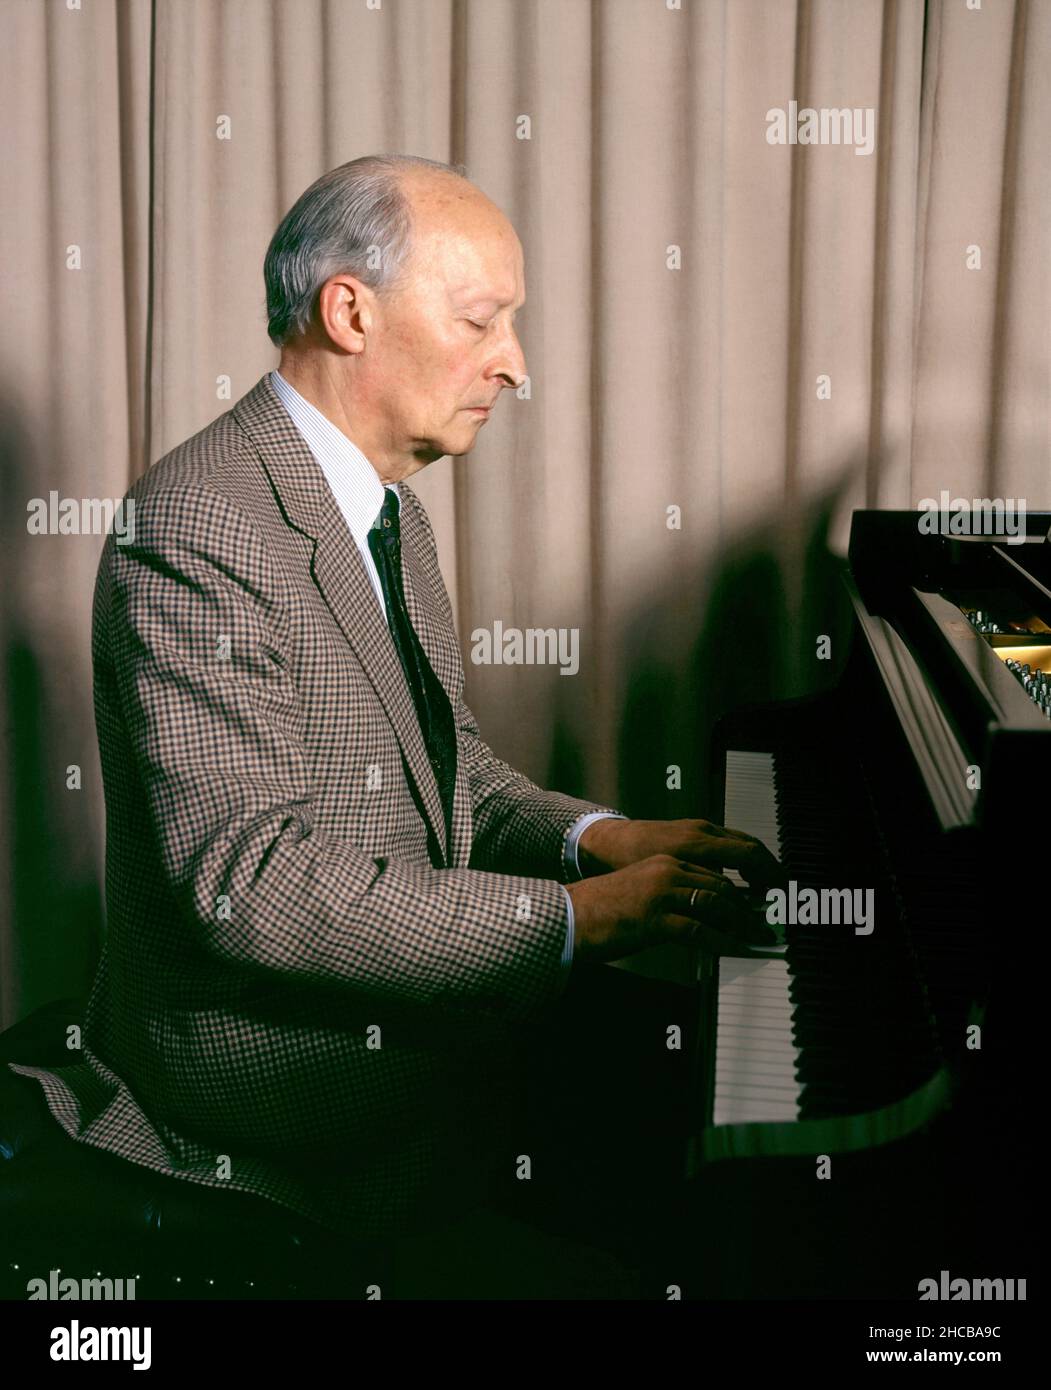 The renowned Polish Composer and  Conductor  Witold Lutoslawski in Swedish Radio's Concert Hall, Berwaldhallen. Stockholm in the eighties, Sweden. Stock Photo